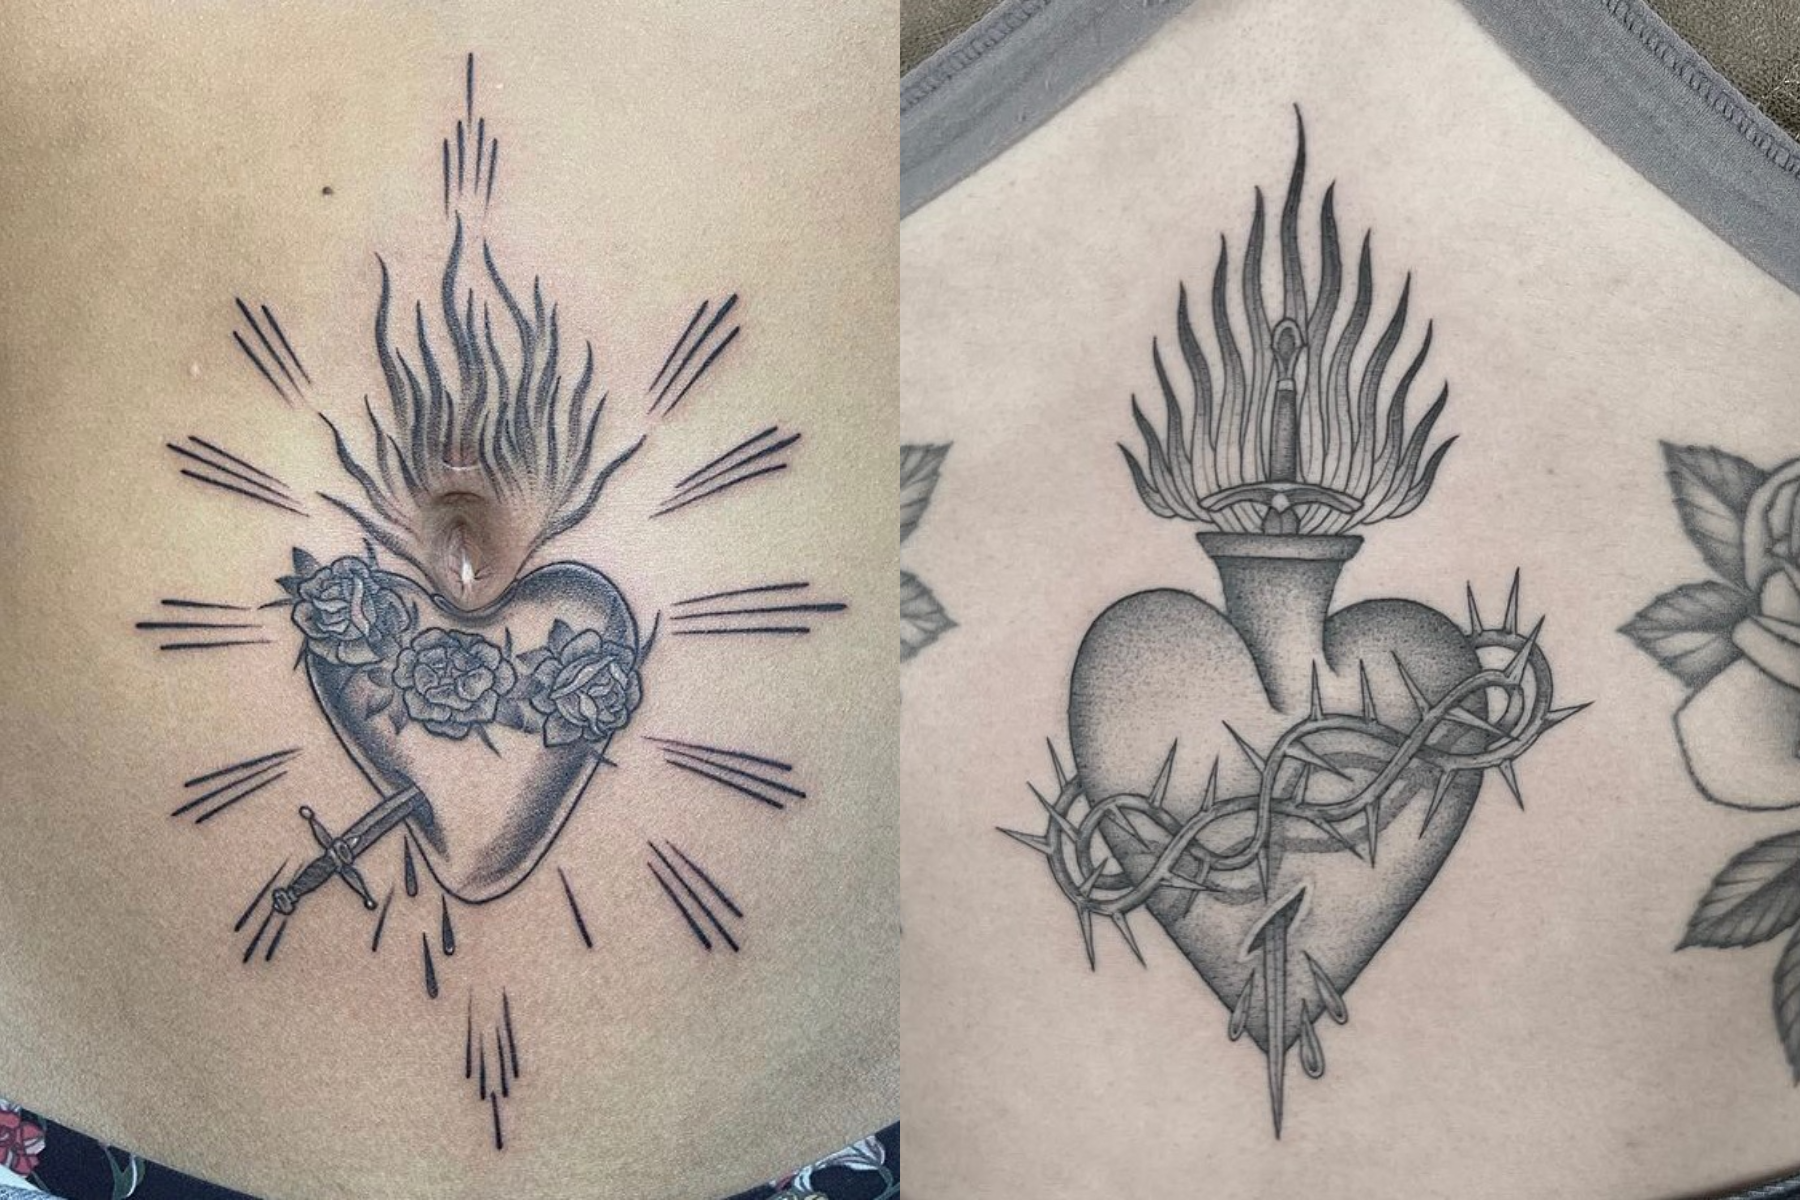 Two ladies with black sacred heart tattoos at the centre of their stomachs